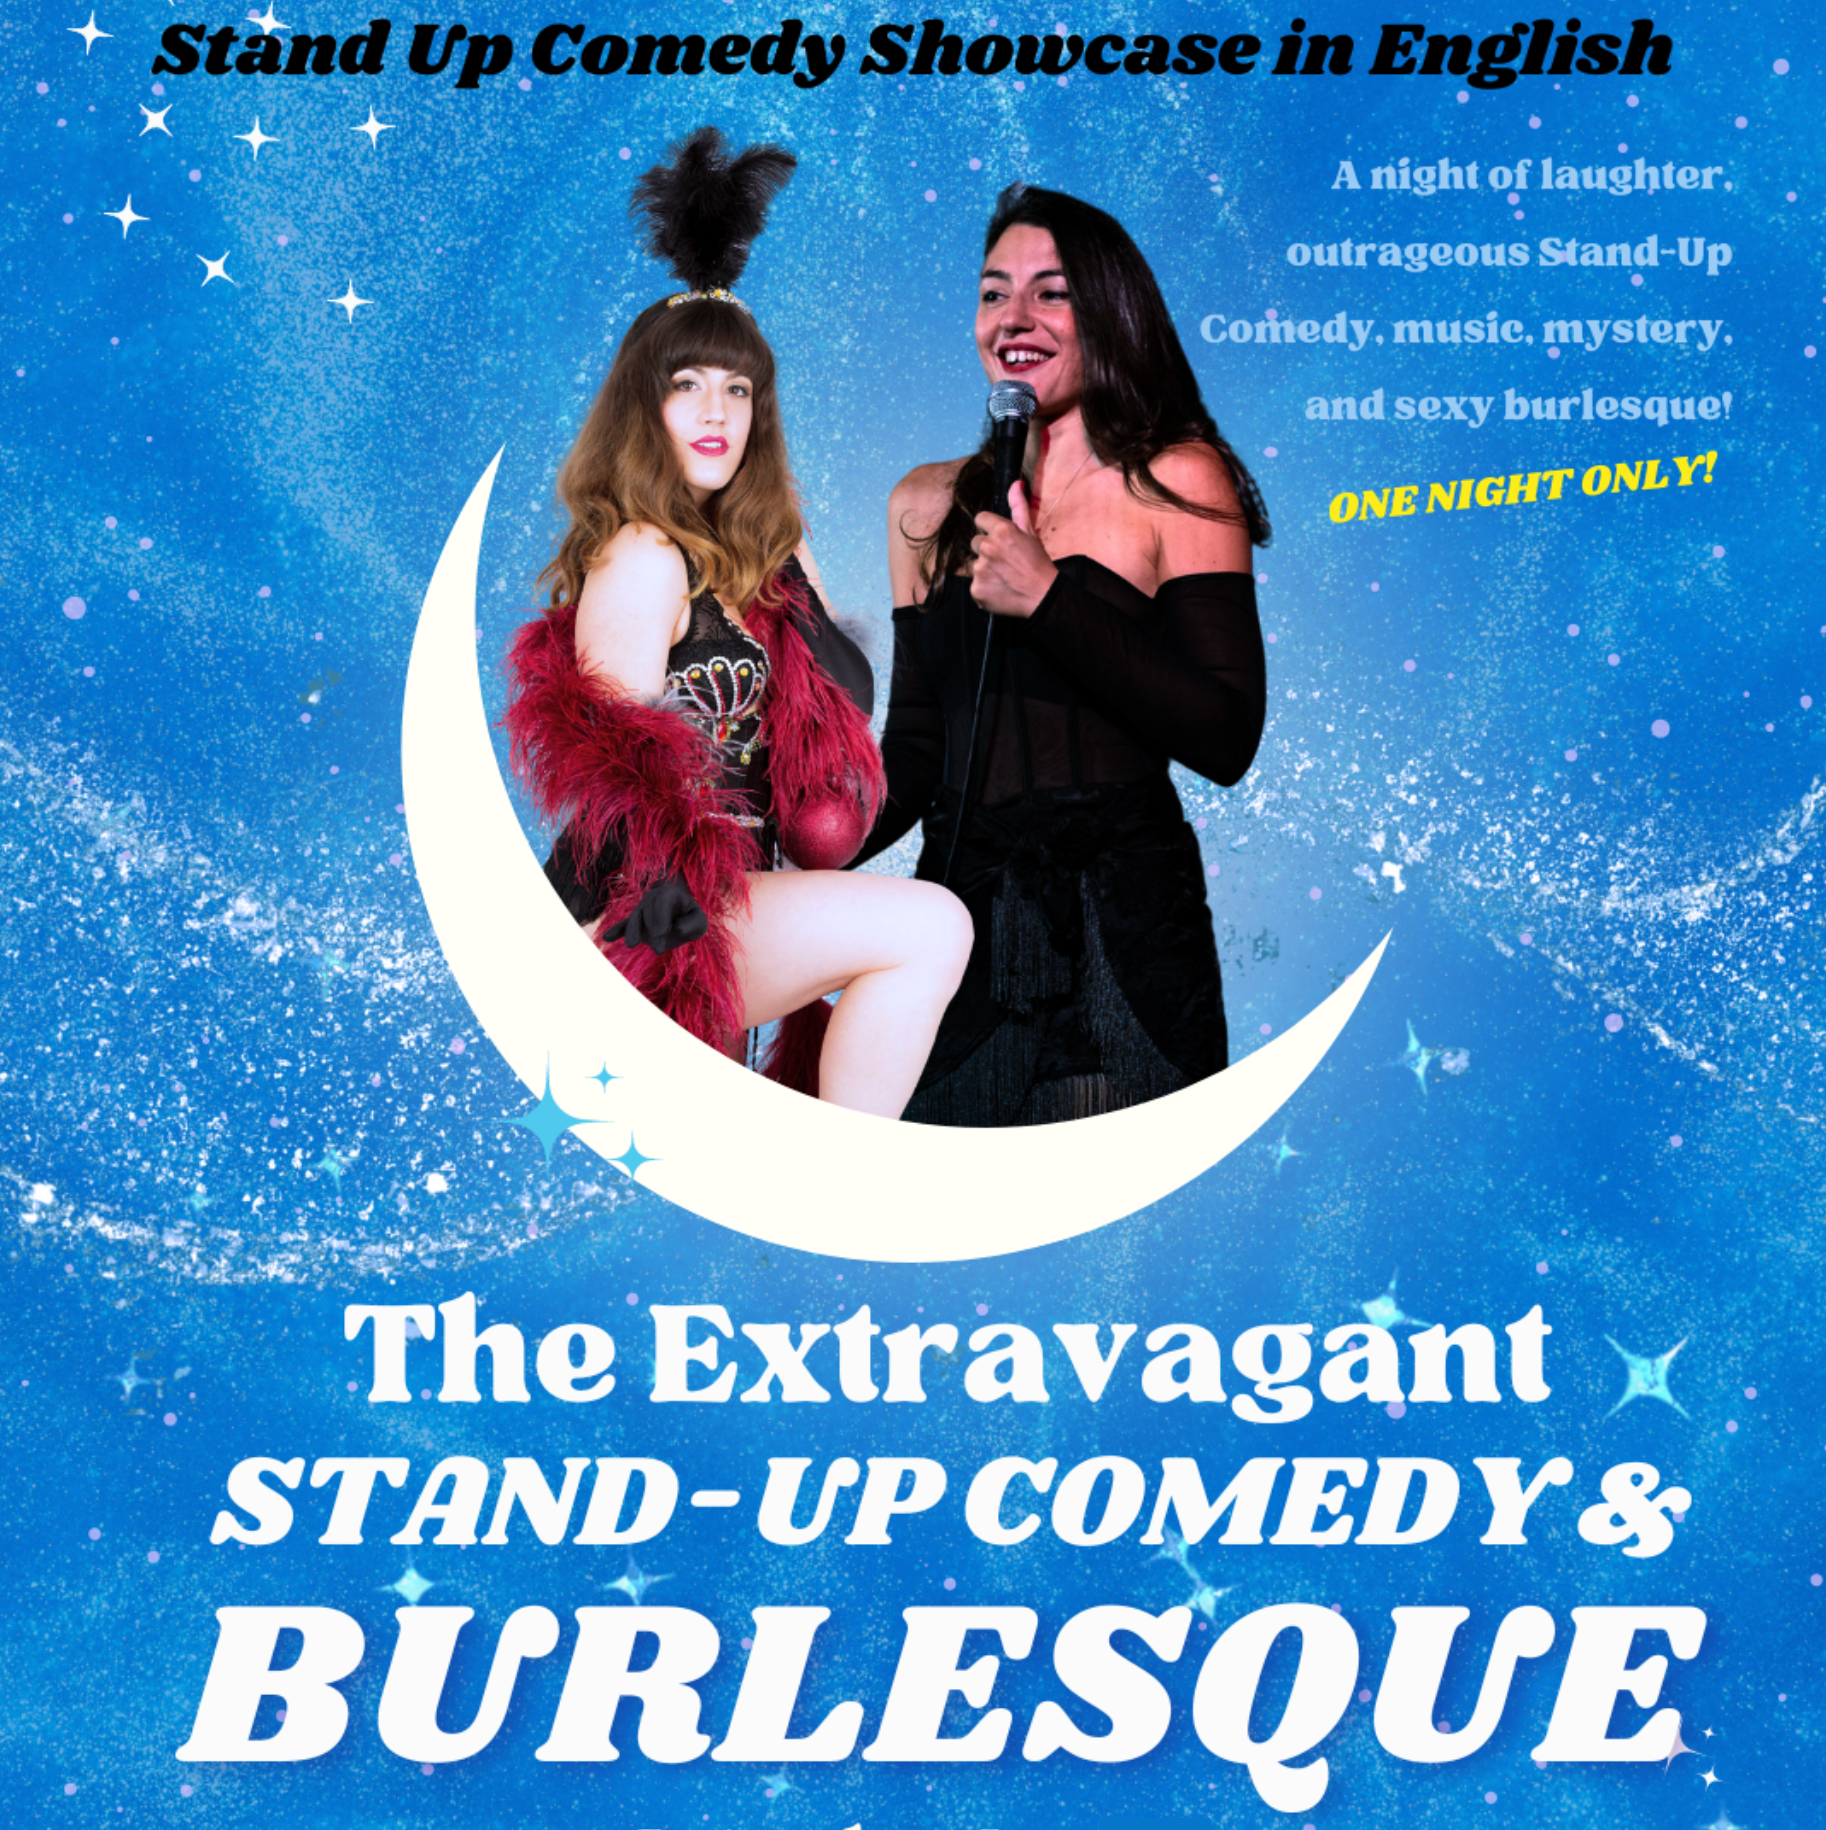 The Extravagant Stand up comedy & burlesque